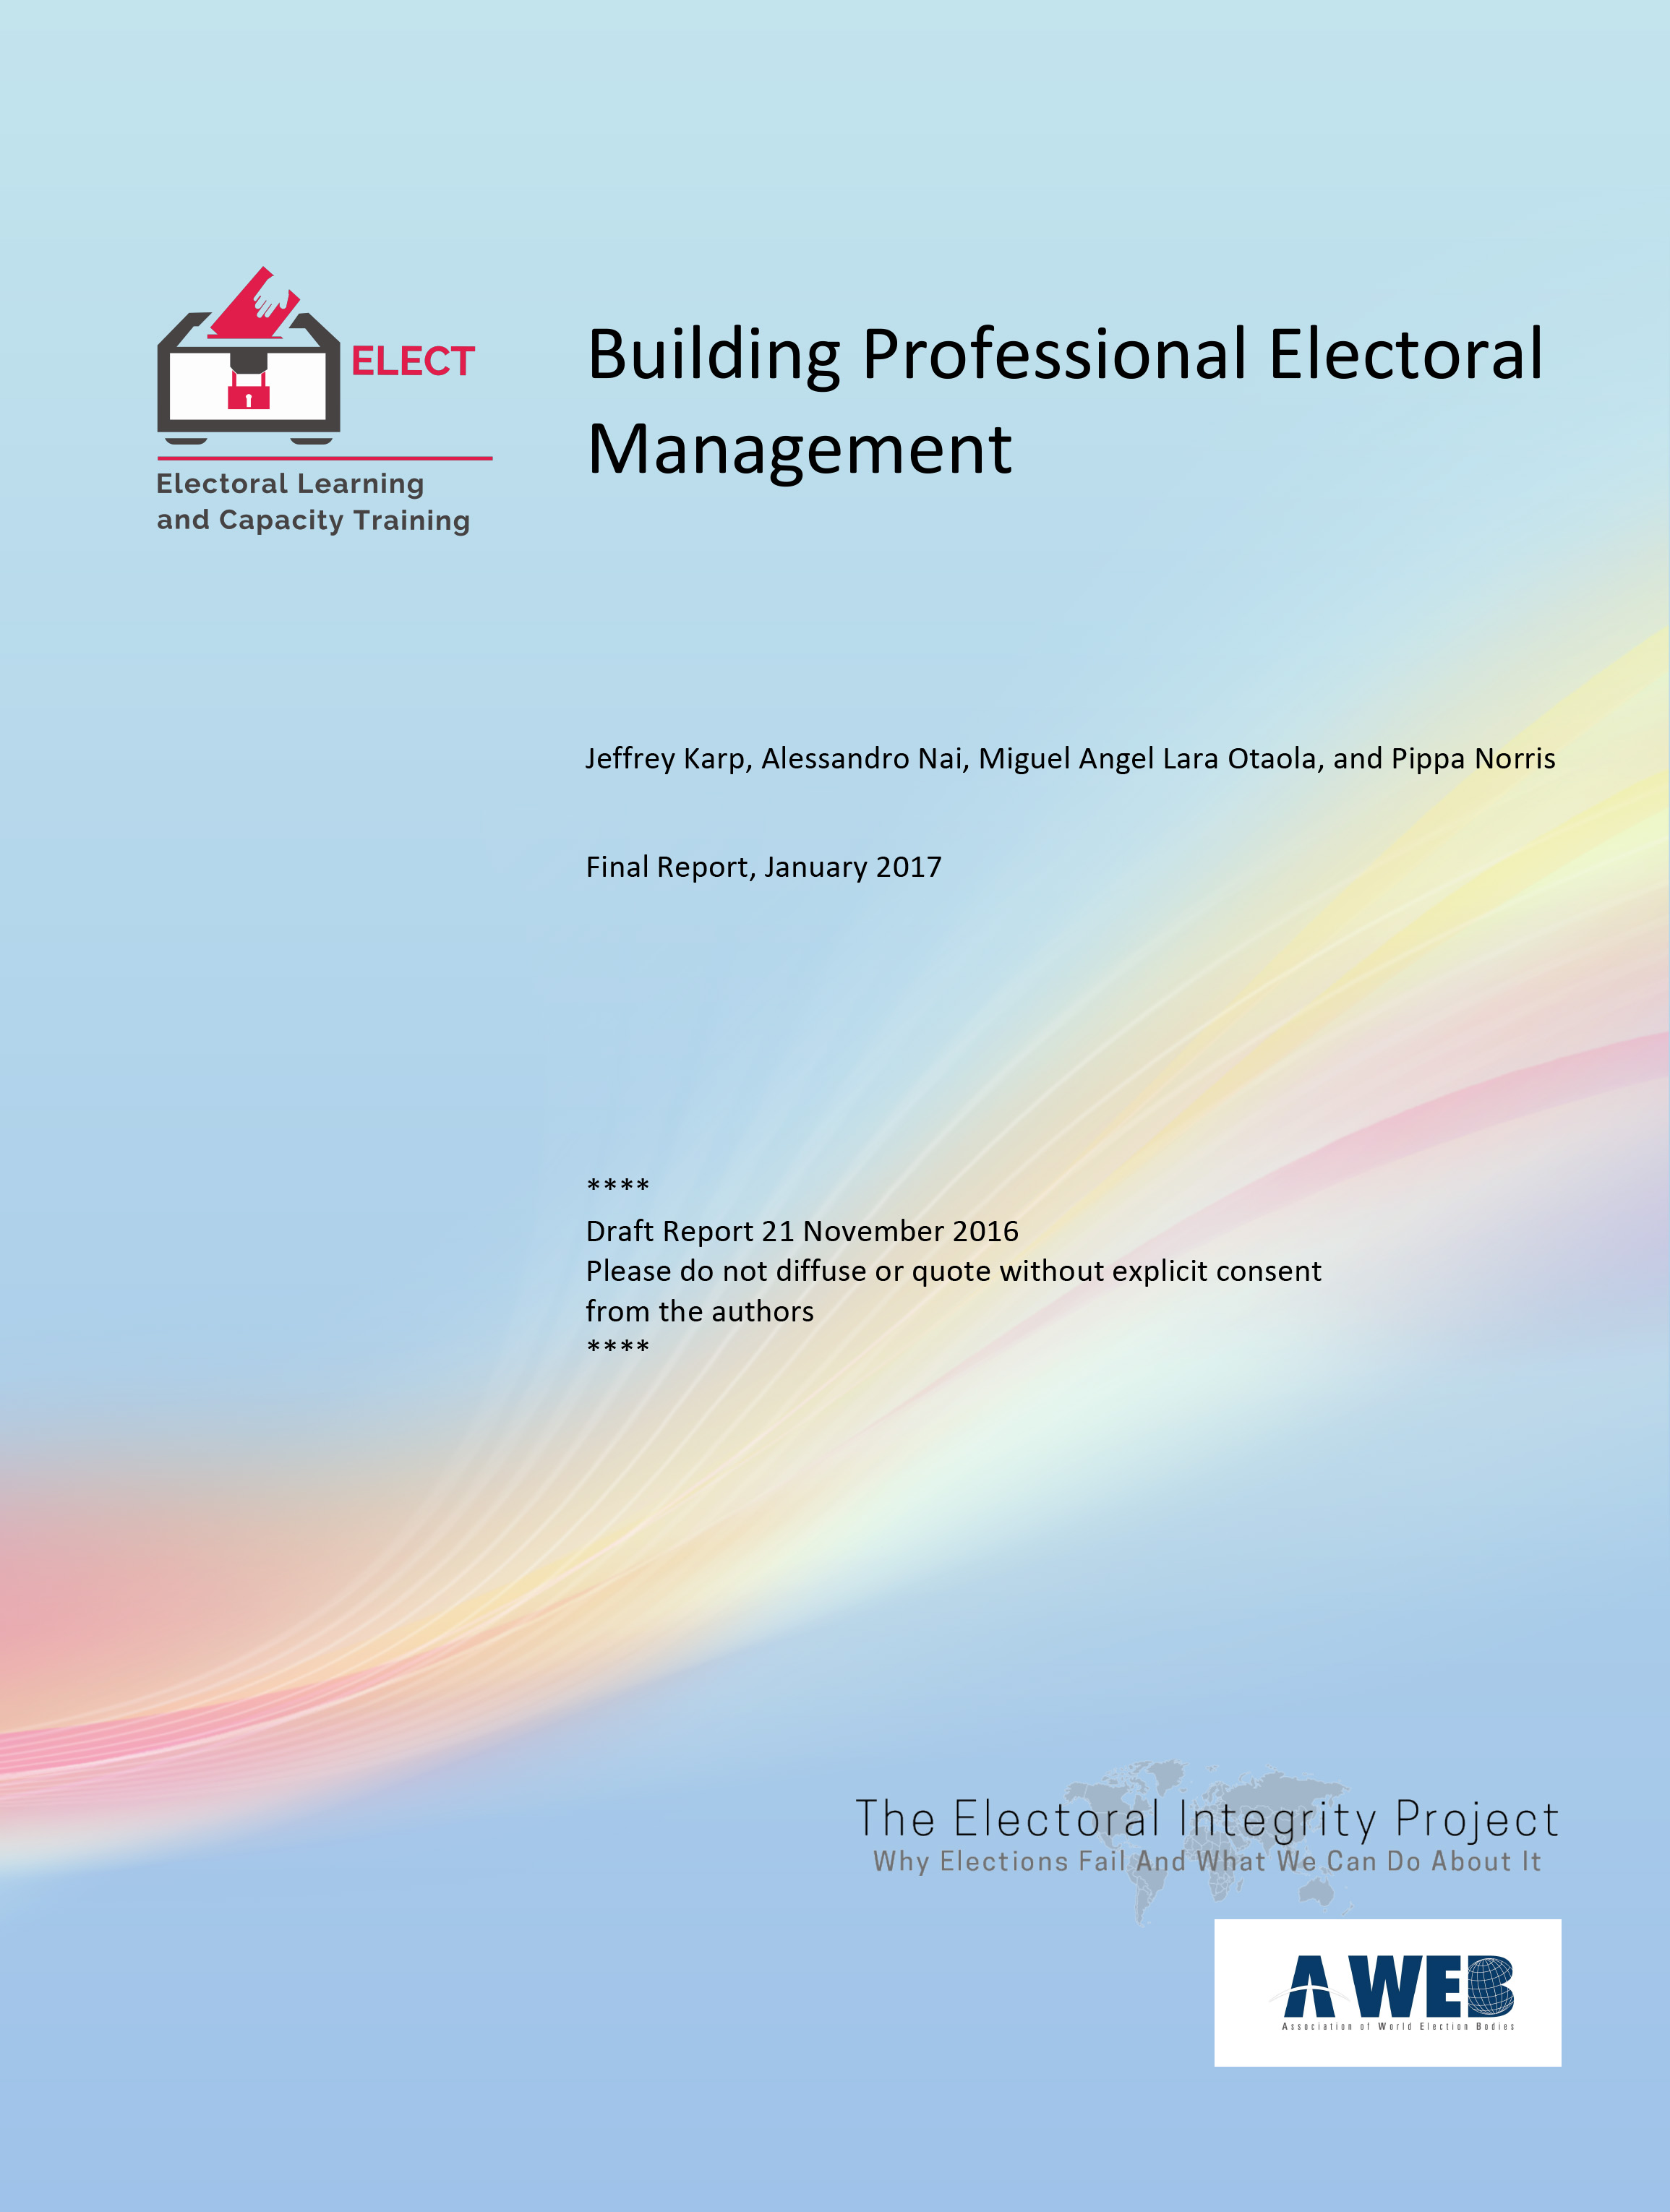 Electoral Learning and Capacity Building.jpg